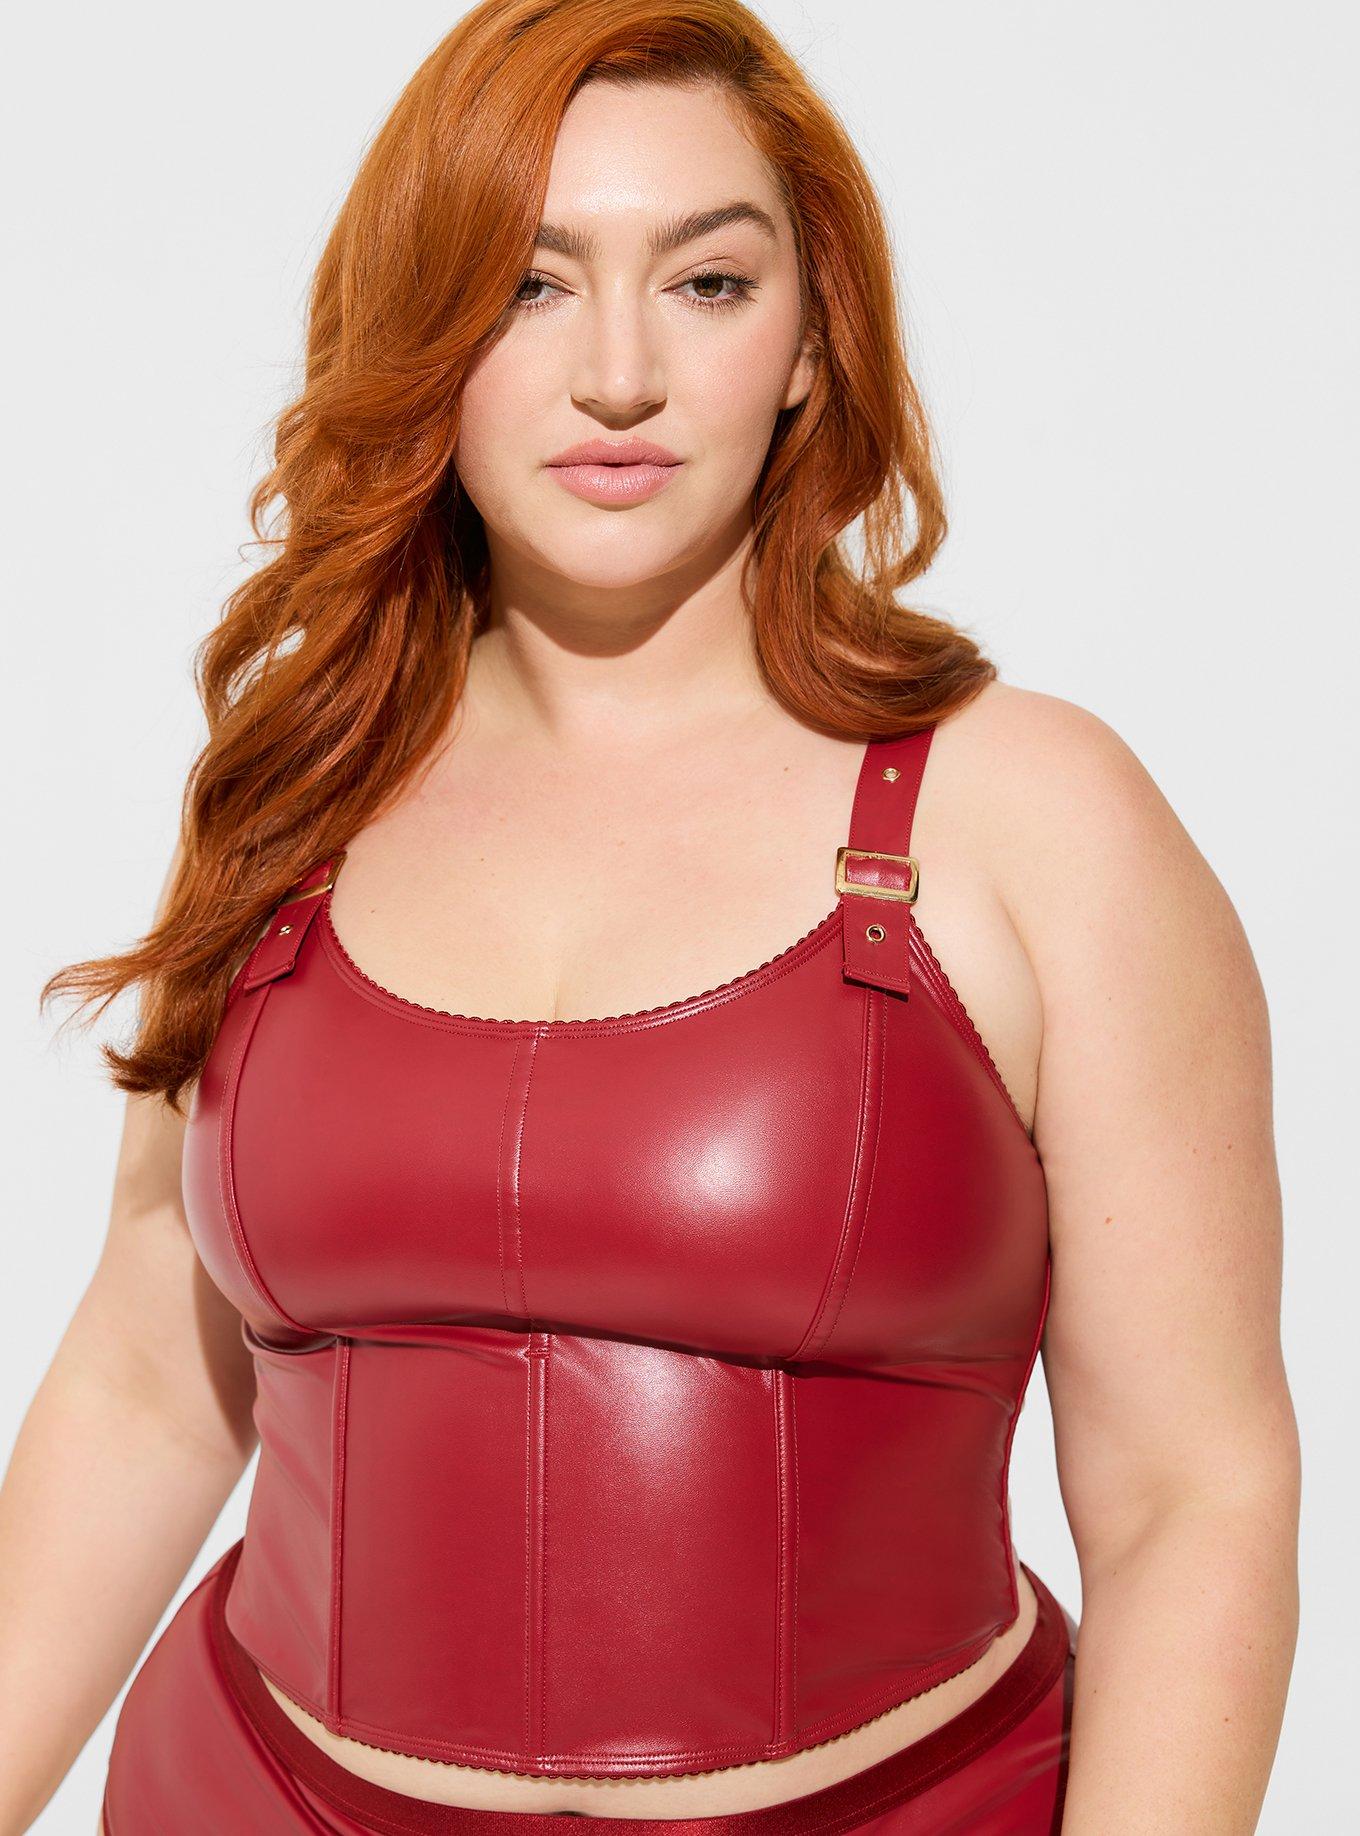 LATEX BODYSUIT Underwired Bustier Corset Bra Top Stretch Faux Leather Shine  Red